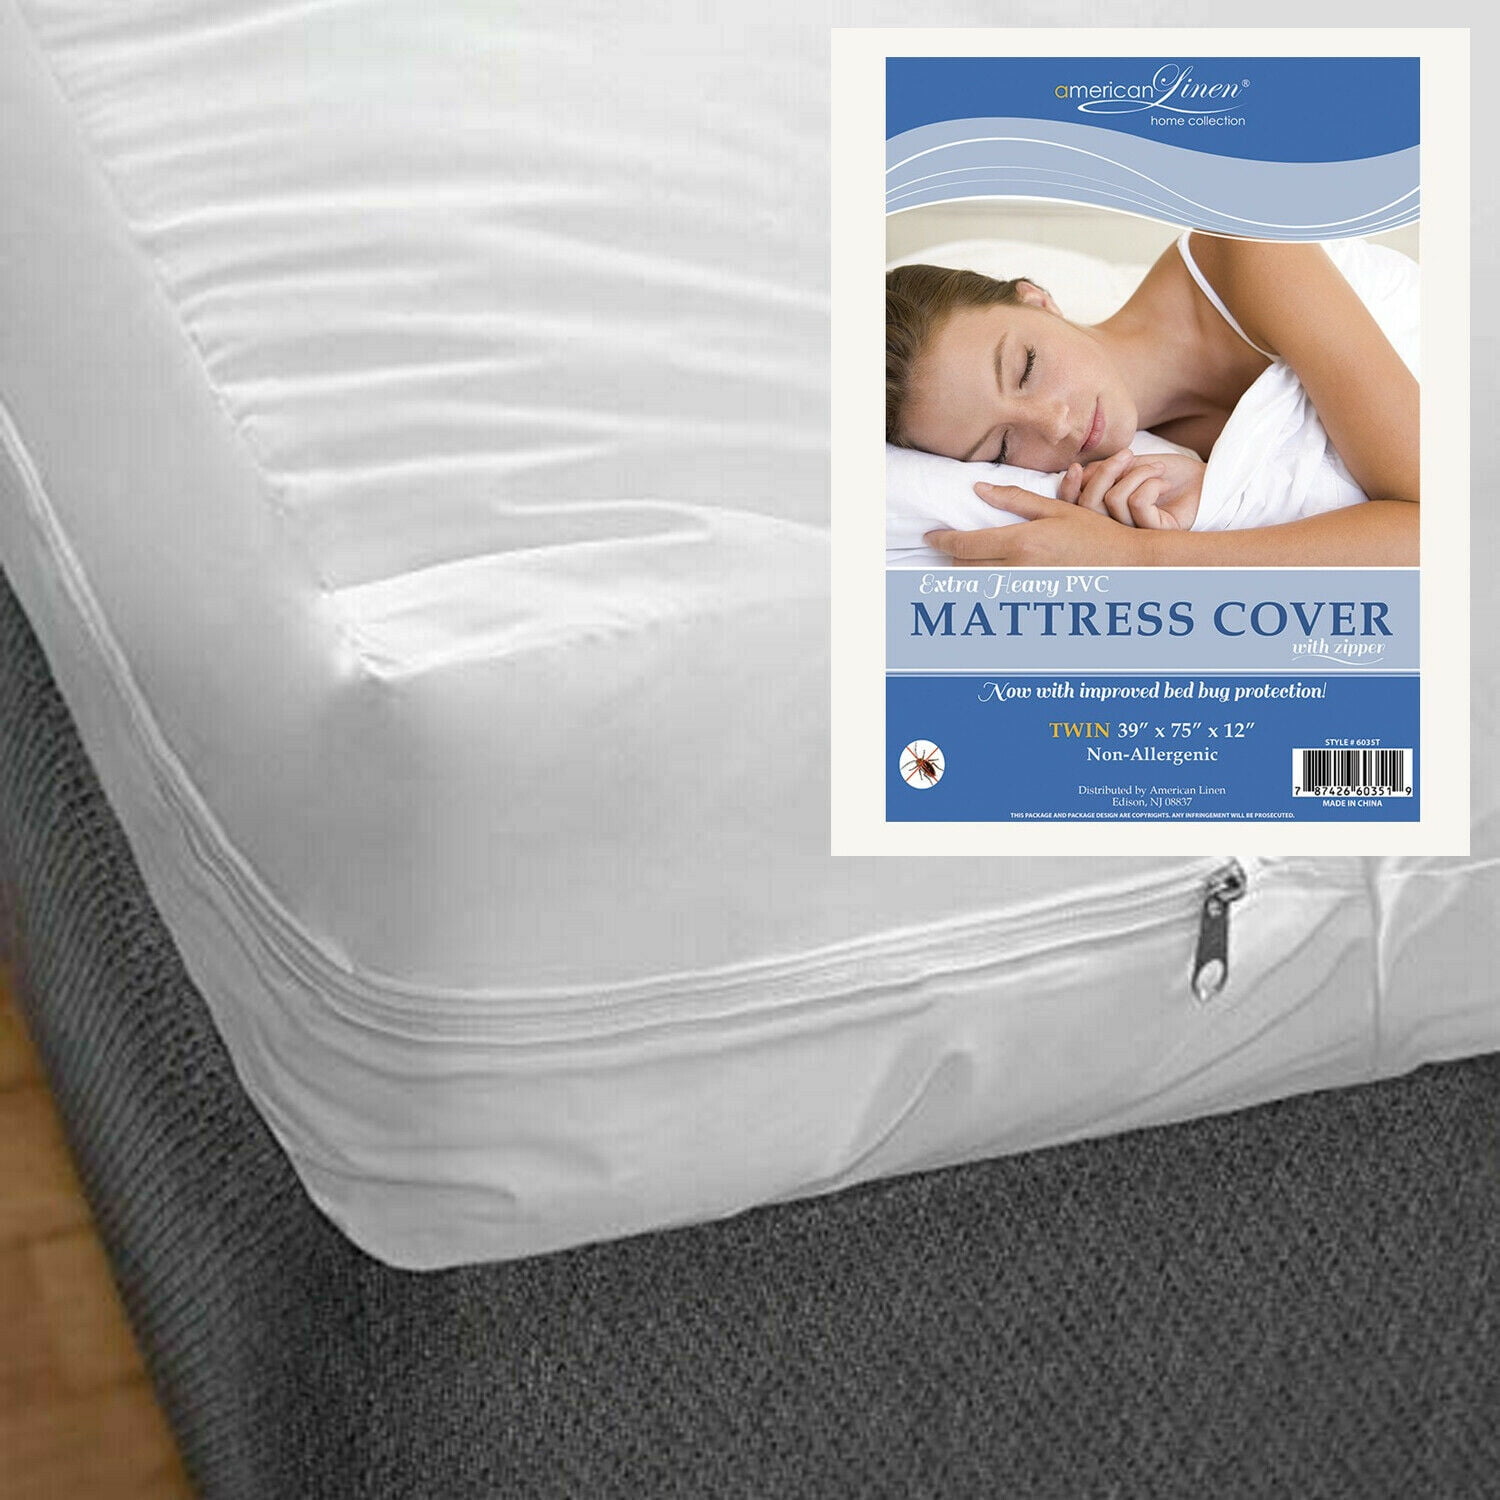 Allergenic Bed Bug Protector, What Is The Best Waterproof Bed Cover